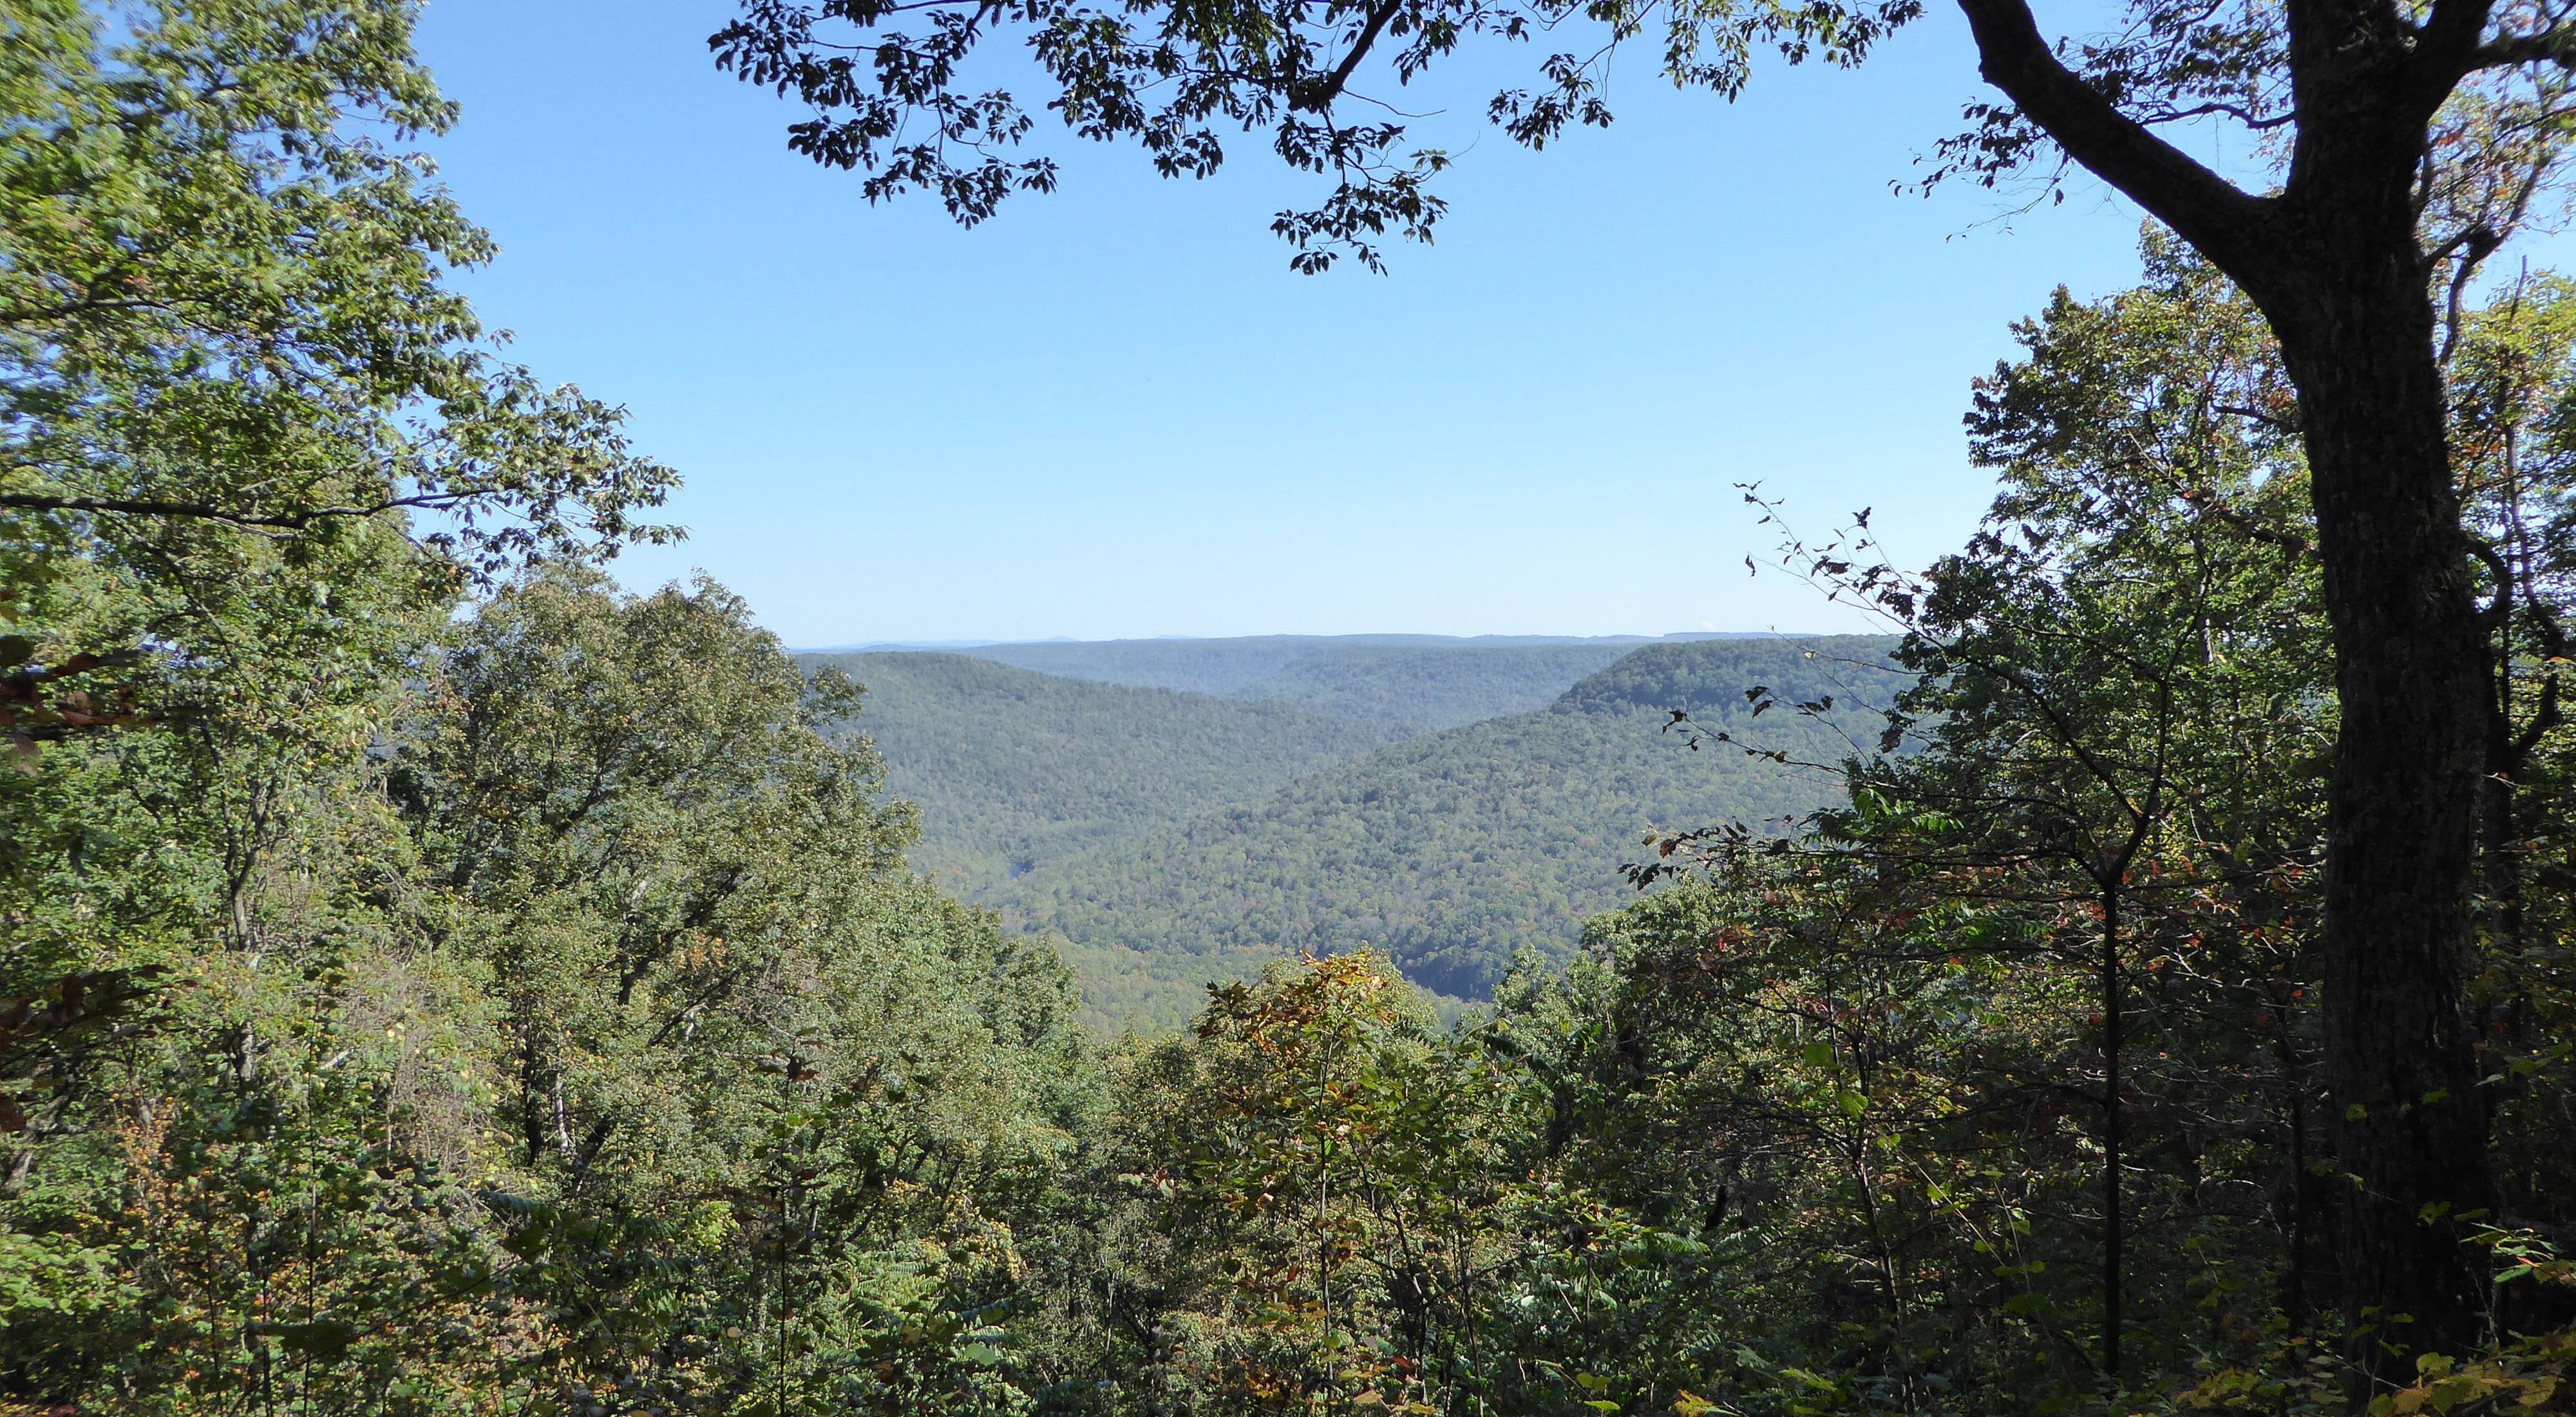 Trees frame the view of a forested valley below.